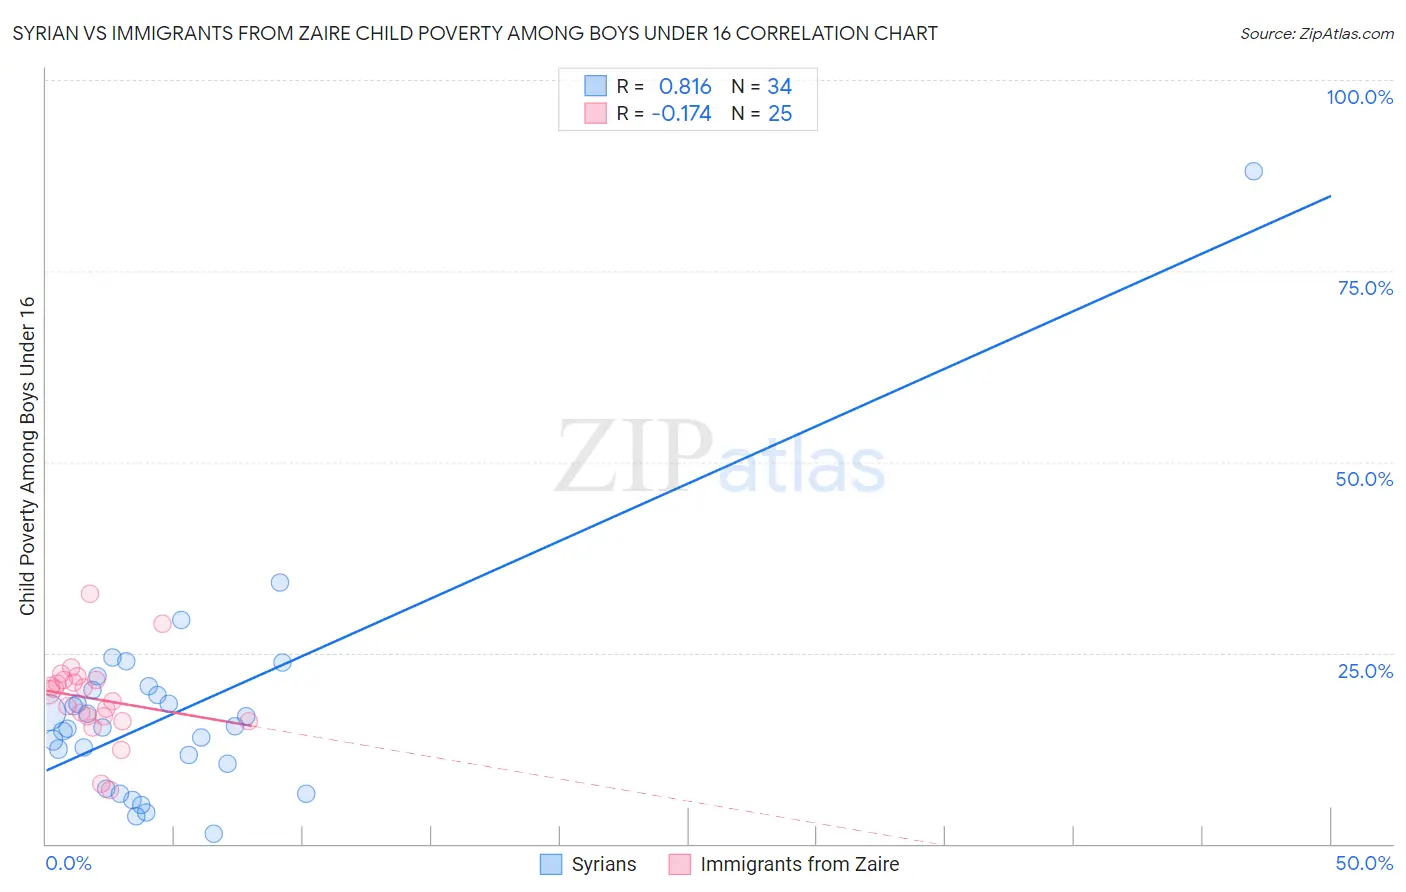 Syrian vs Immigrants from Zaire Child Poverty Among Boys Under 16